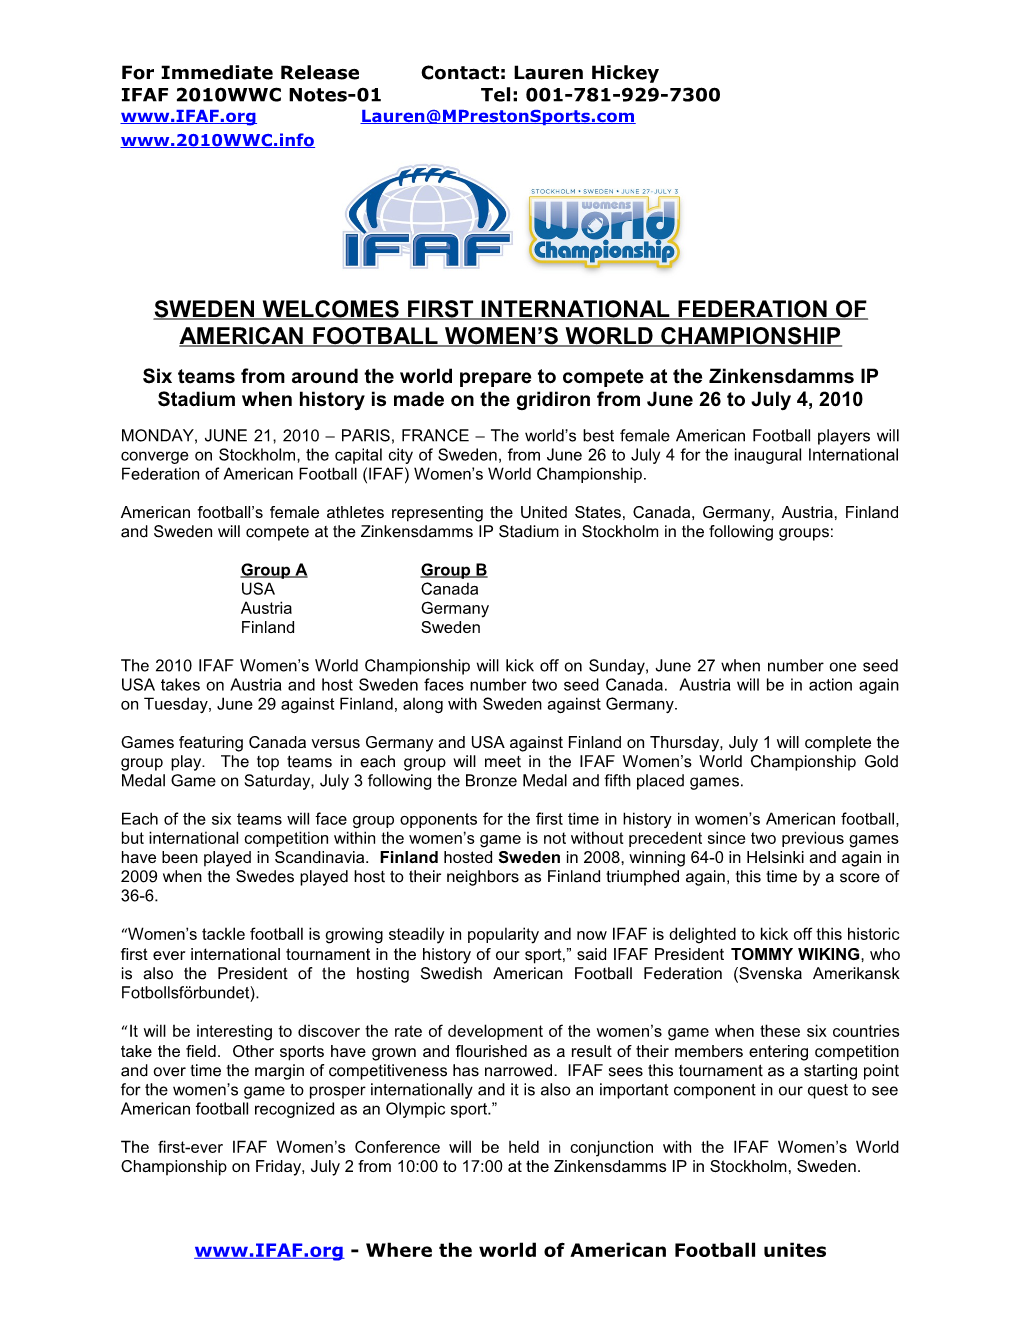 Sweden Welcomes First International Federation of American Football Women S World Championship